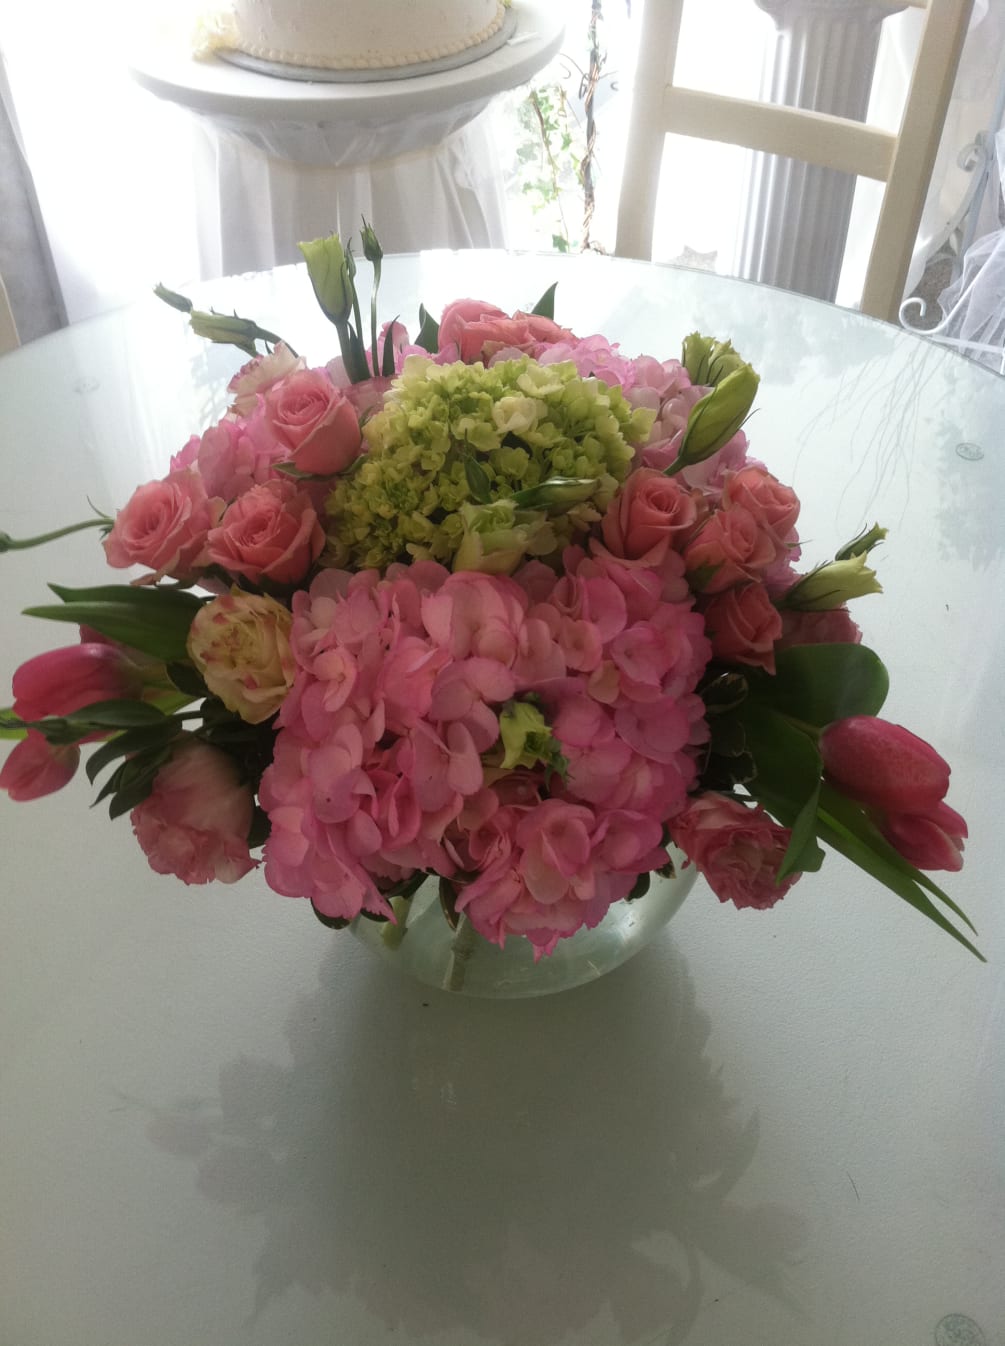 A gorgeous mix of pinks and greens hand-designed in a clear glass